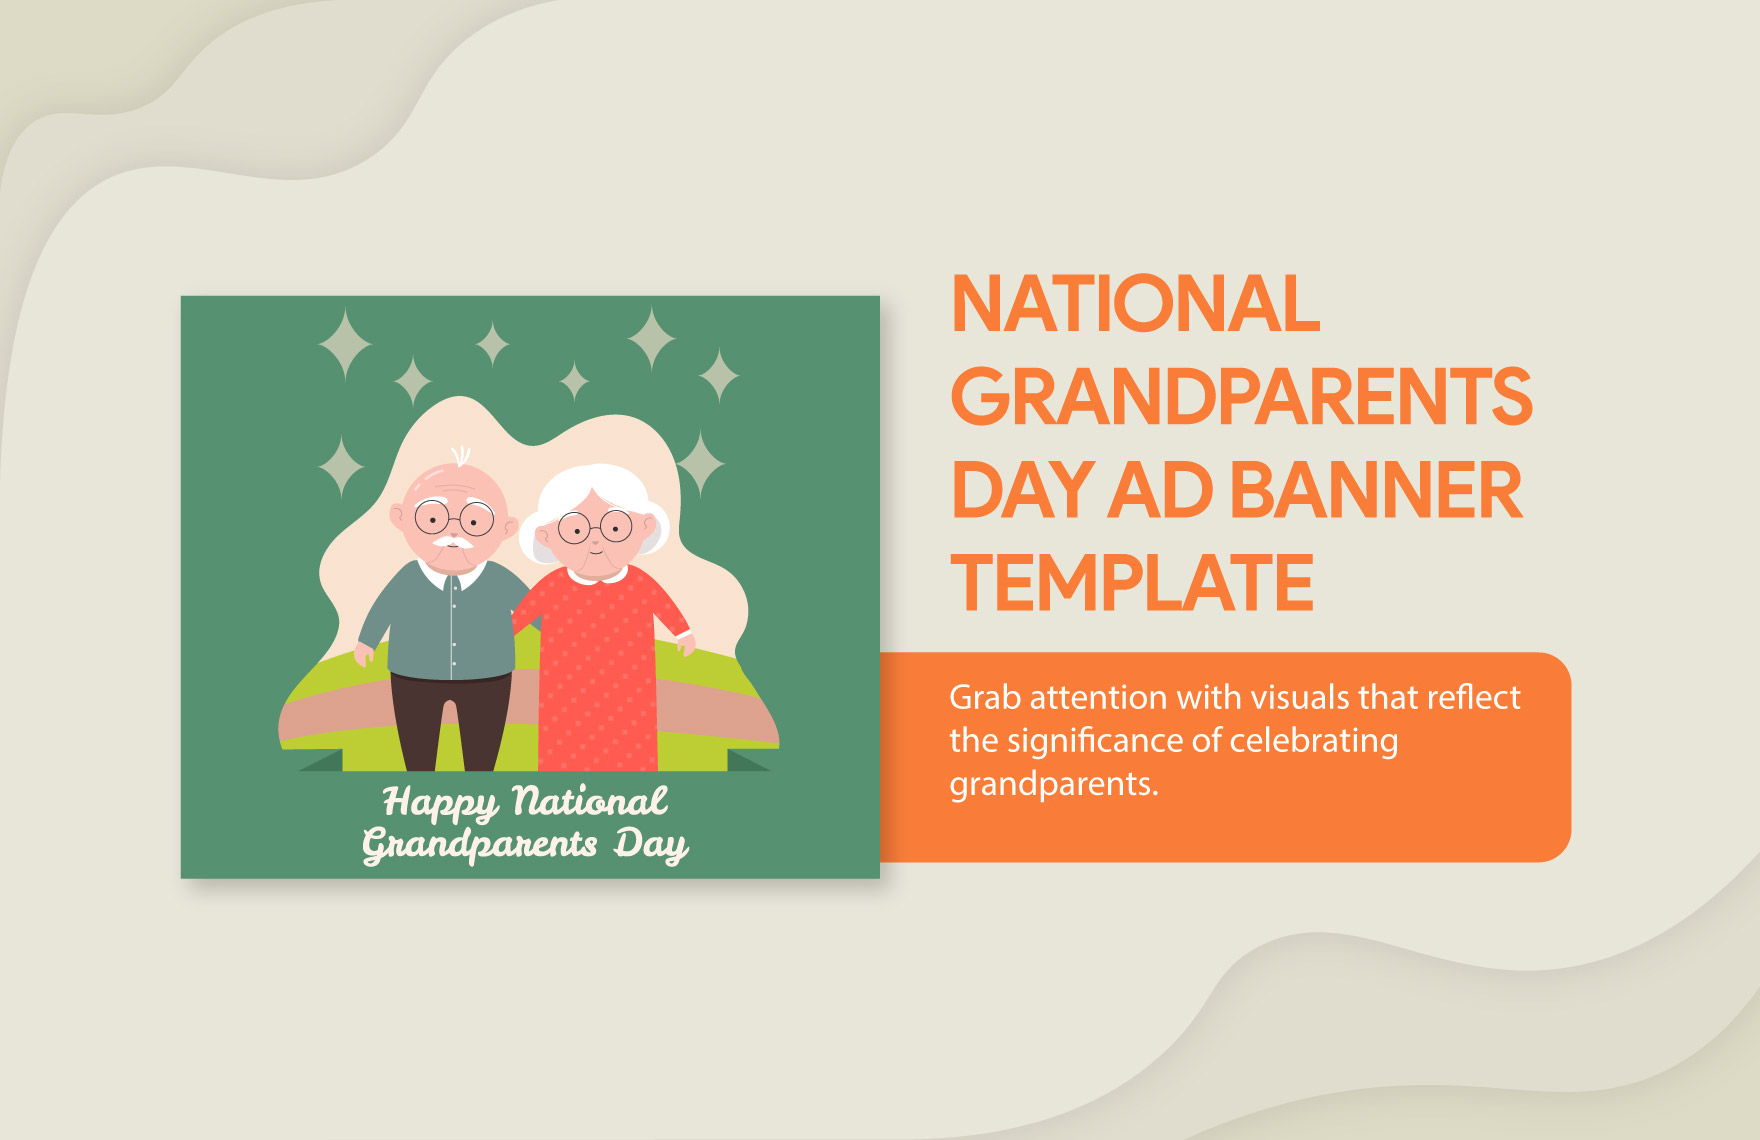 National Grandparents Day Ad Banner Template